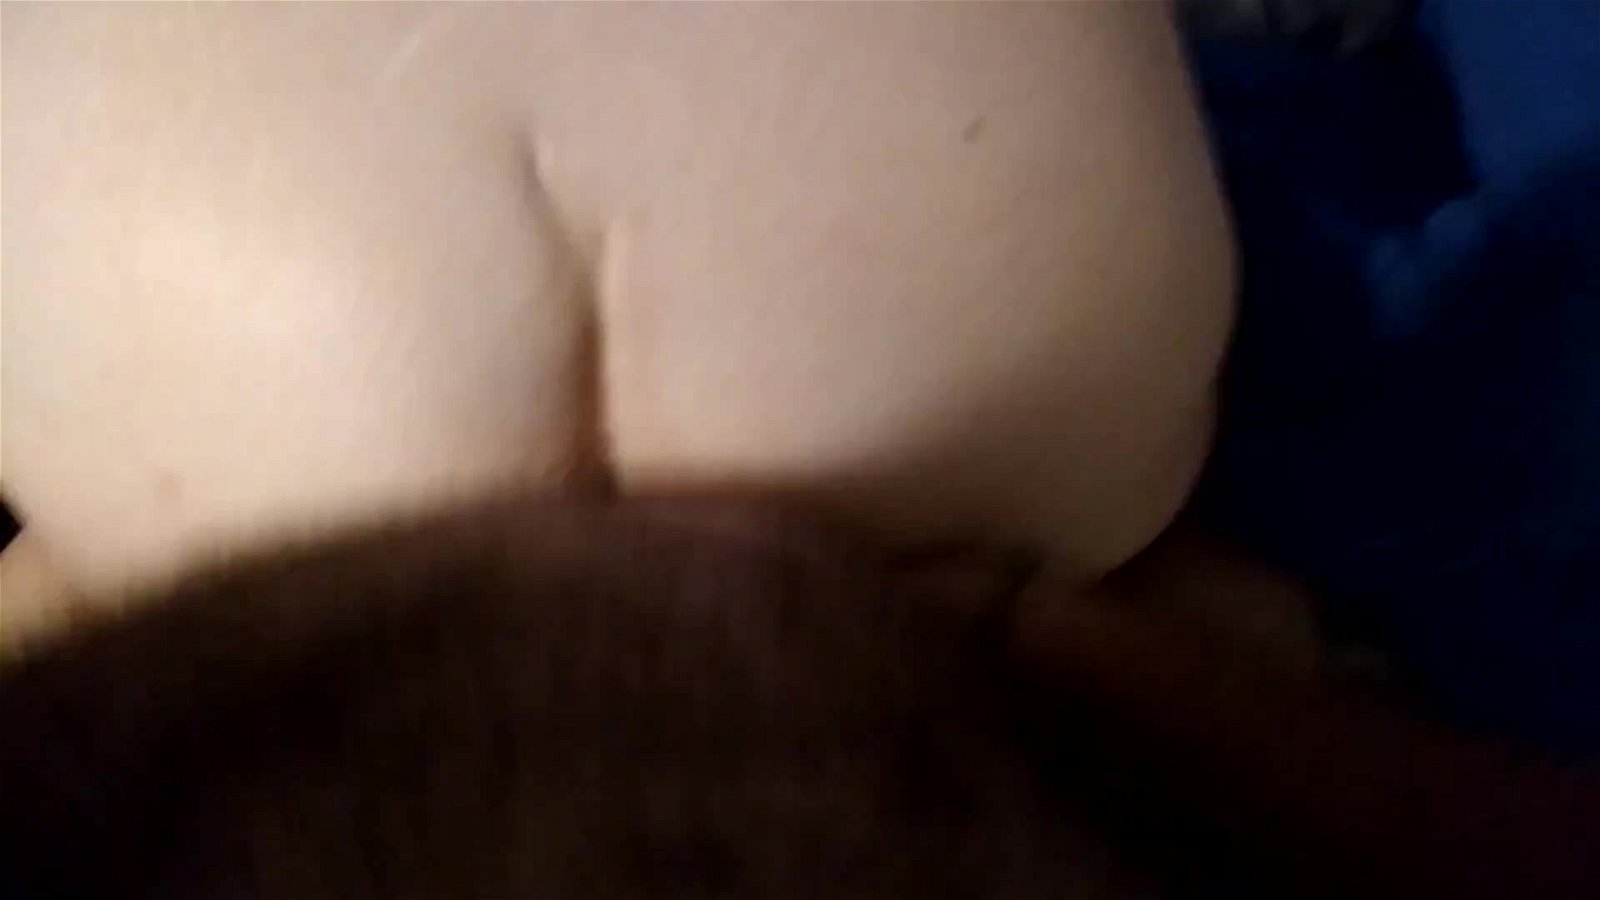 Video by D and W Erotic with the username @DandWErotic,  September 2, 2021 at 4:02 AM. The post is about the topic Amateurs and the text says 'watch Daddy get into that bbw pussy! check out our Just for Fans!'